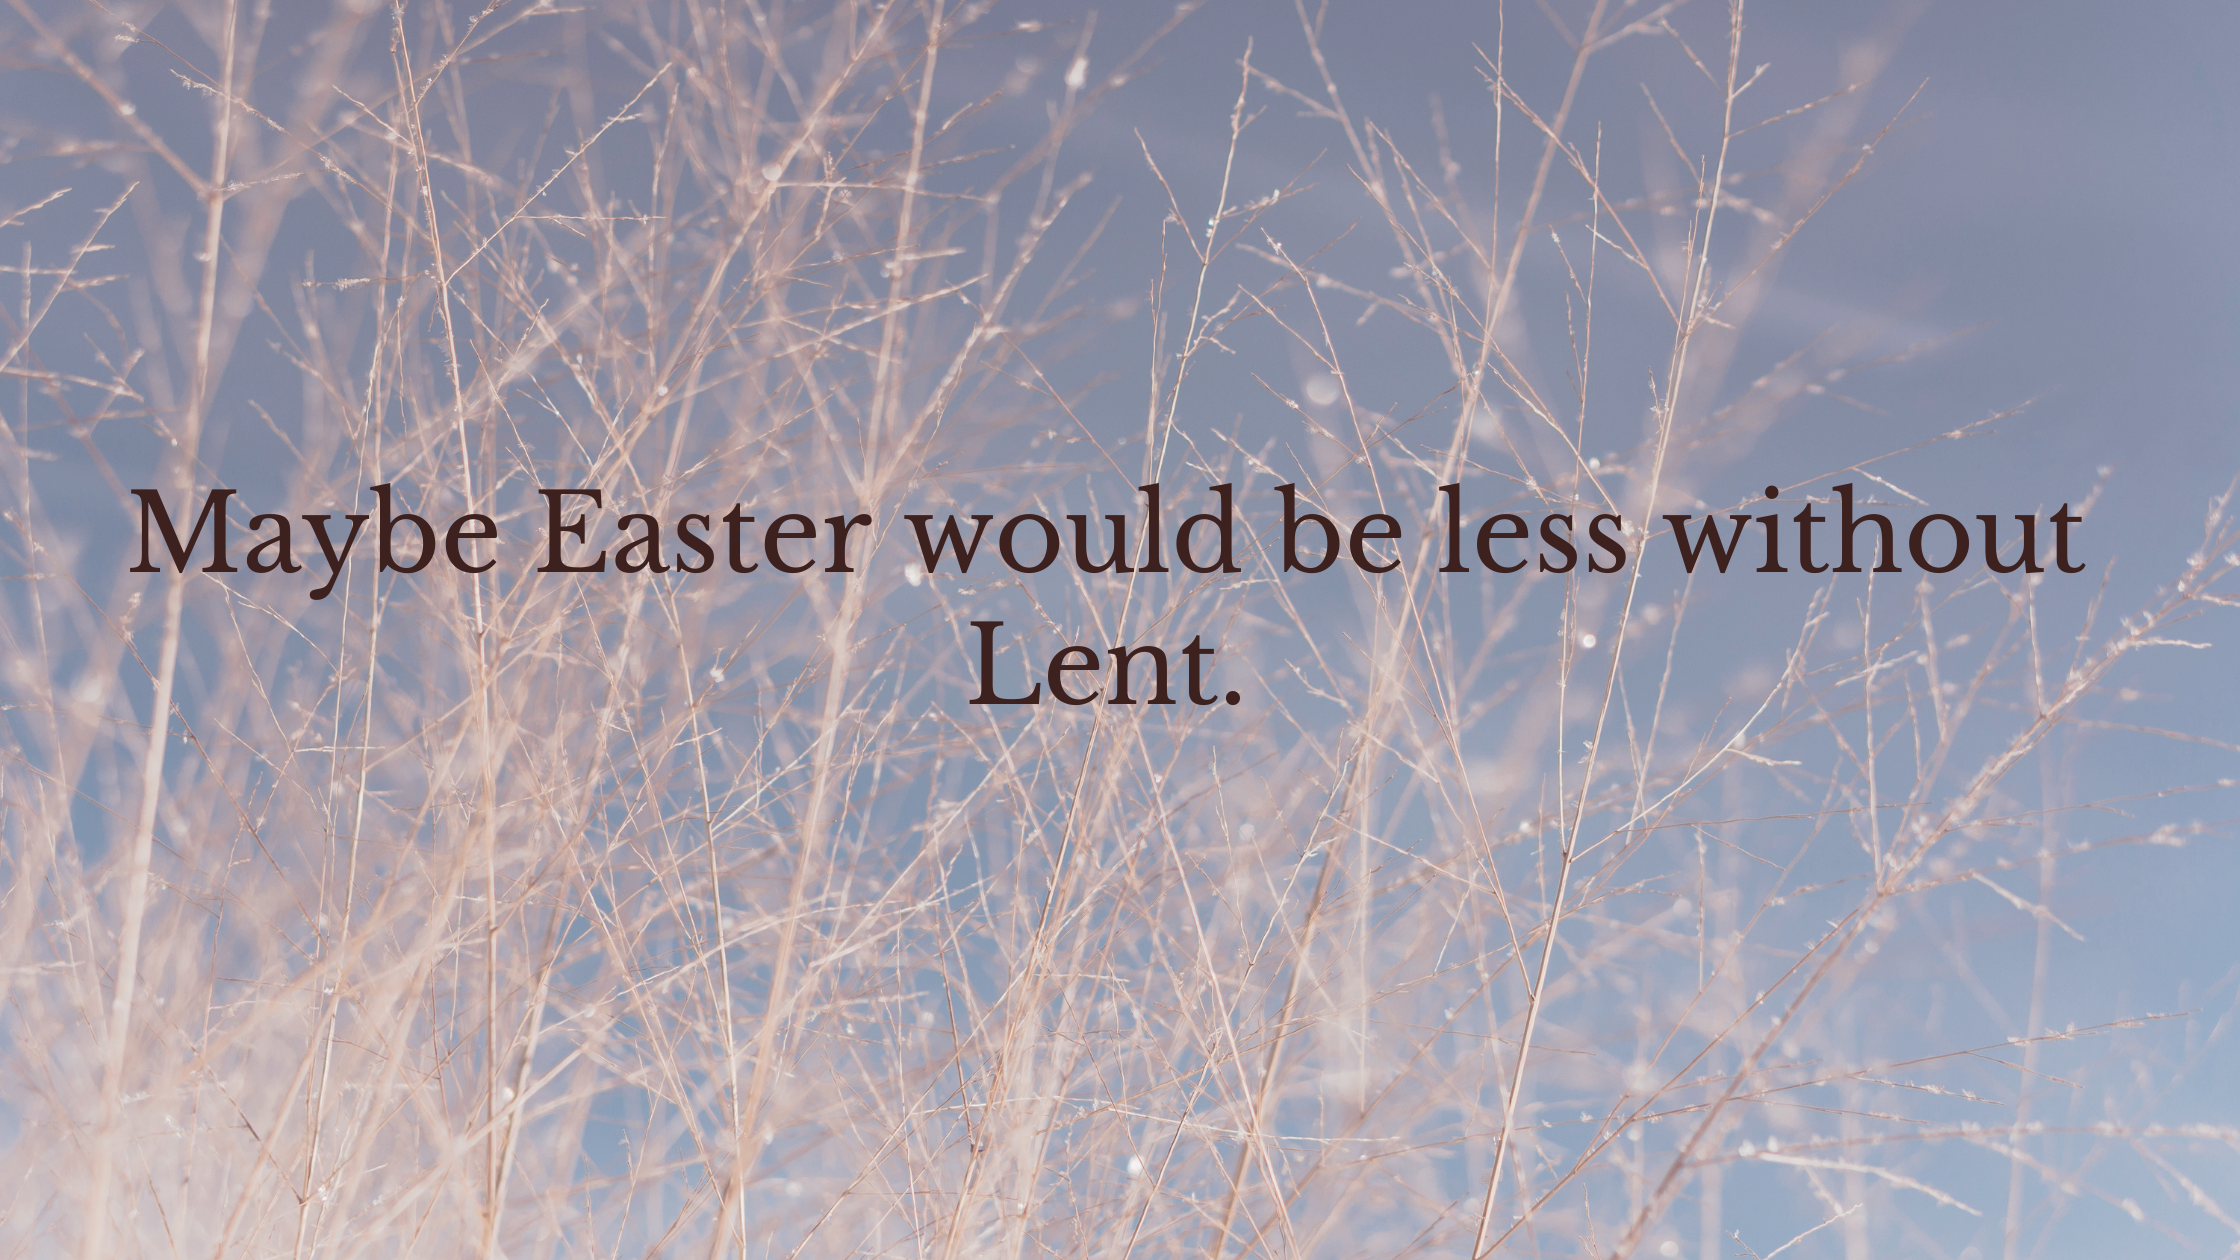 Maybe Easter would be less without Lent.